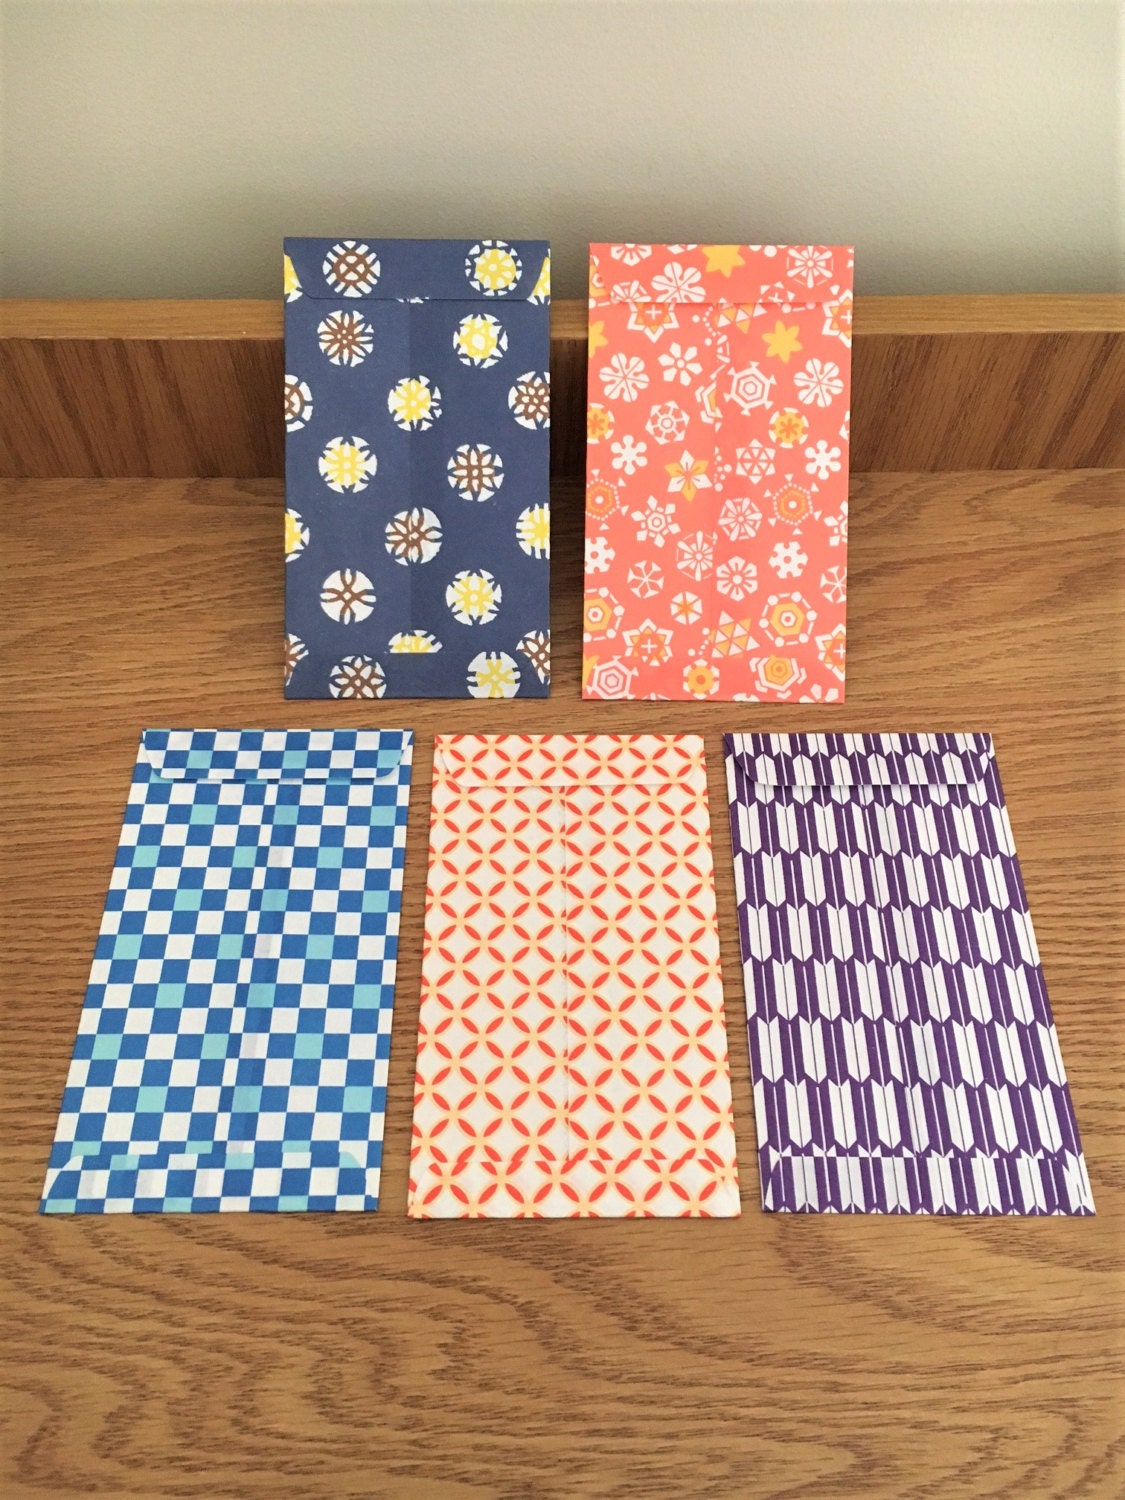 Origami Paper Gift Envelopes With Bright Modern Designs, Voucher ...